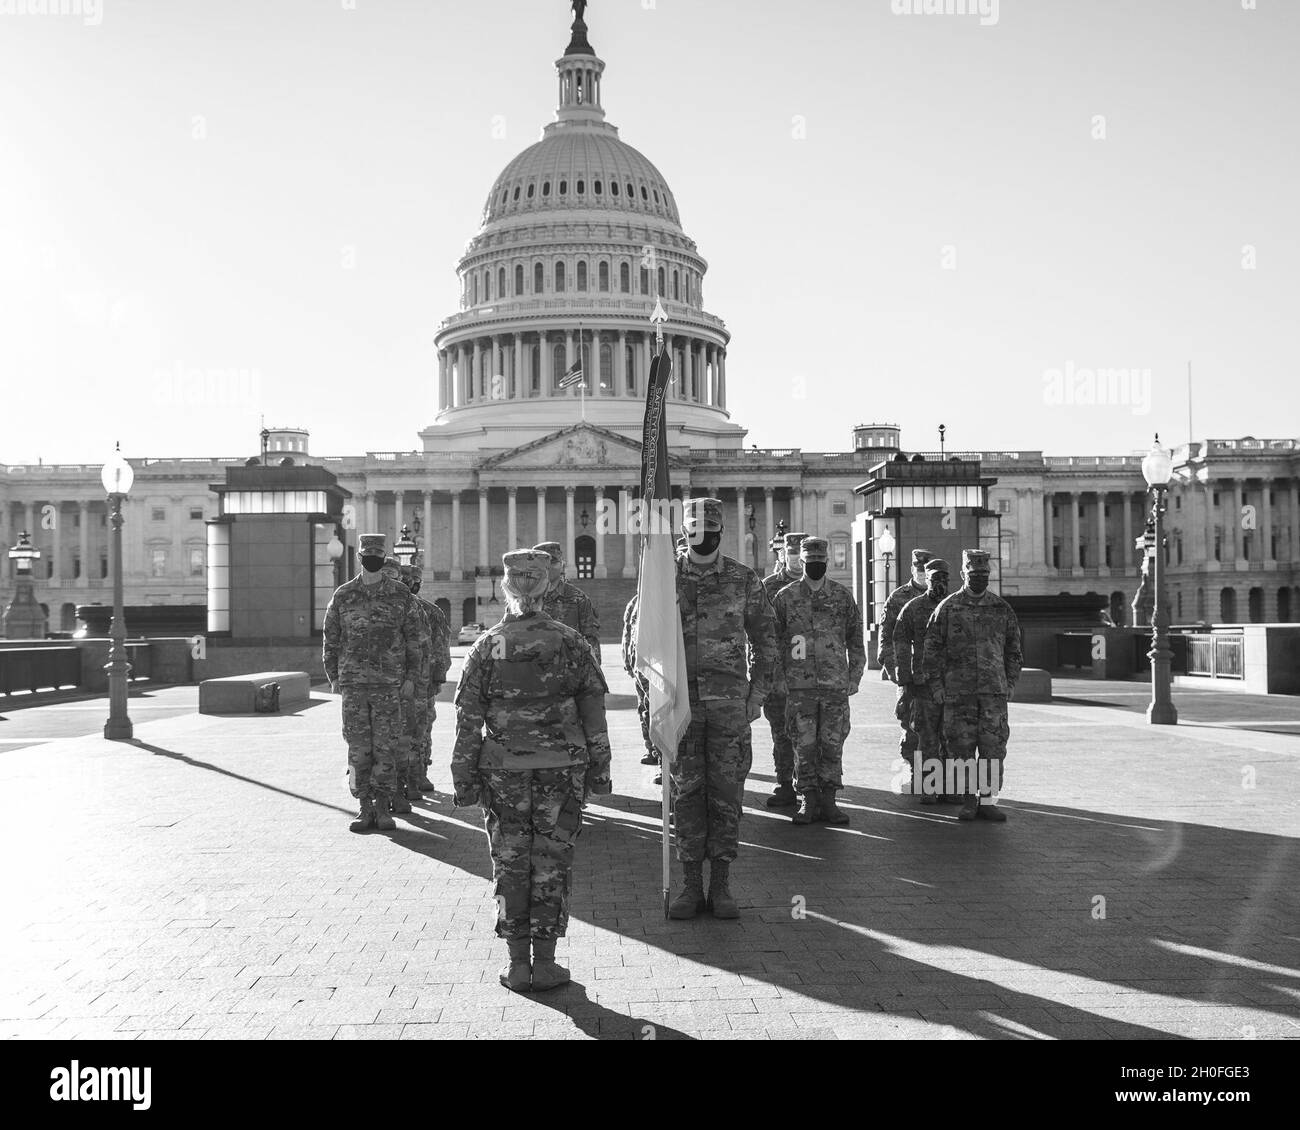 U.S. Soldiers with the 177th Military Police Brigade, Michigan National Guard, stand in formation during an award ceremony at the U.S. Capitol in Washington, D.C., Feb. 25, 2021. The National Guard has been requested to continue supporting federal law enforcement agencies with security, communications, medical evacuation, logistics, and safety support to state, district and federal agencies through mid-March. Stock Photo